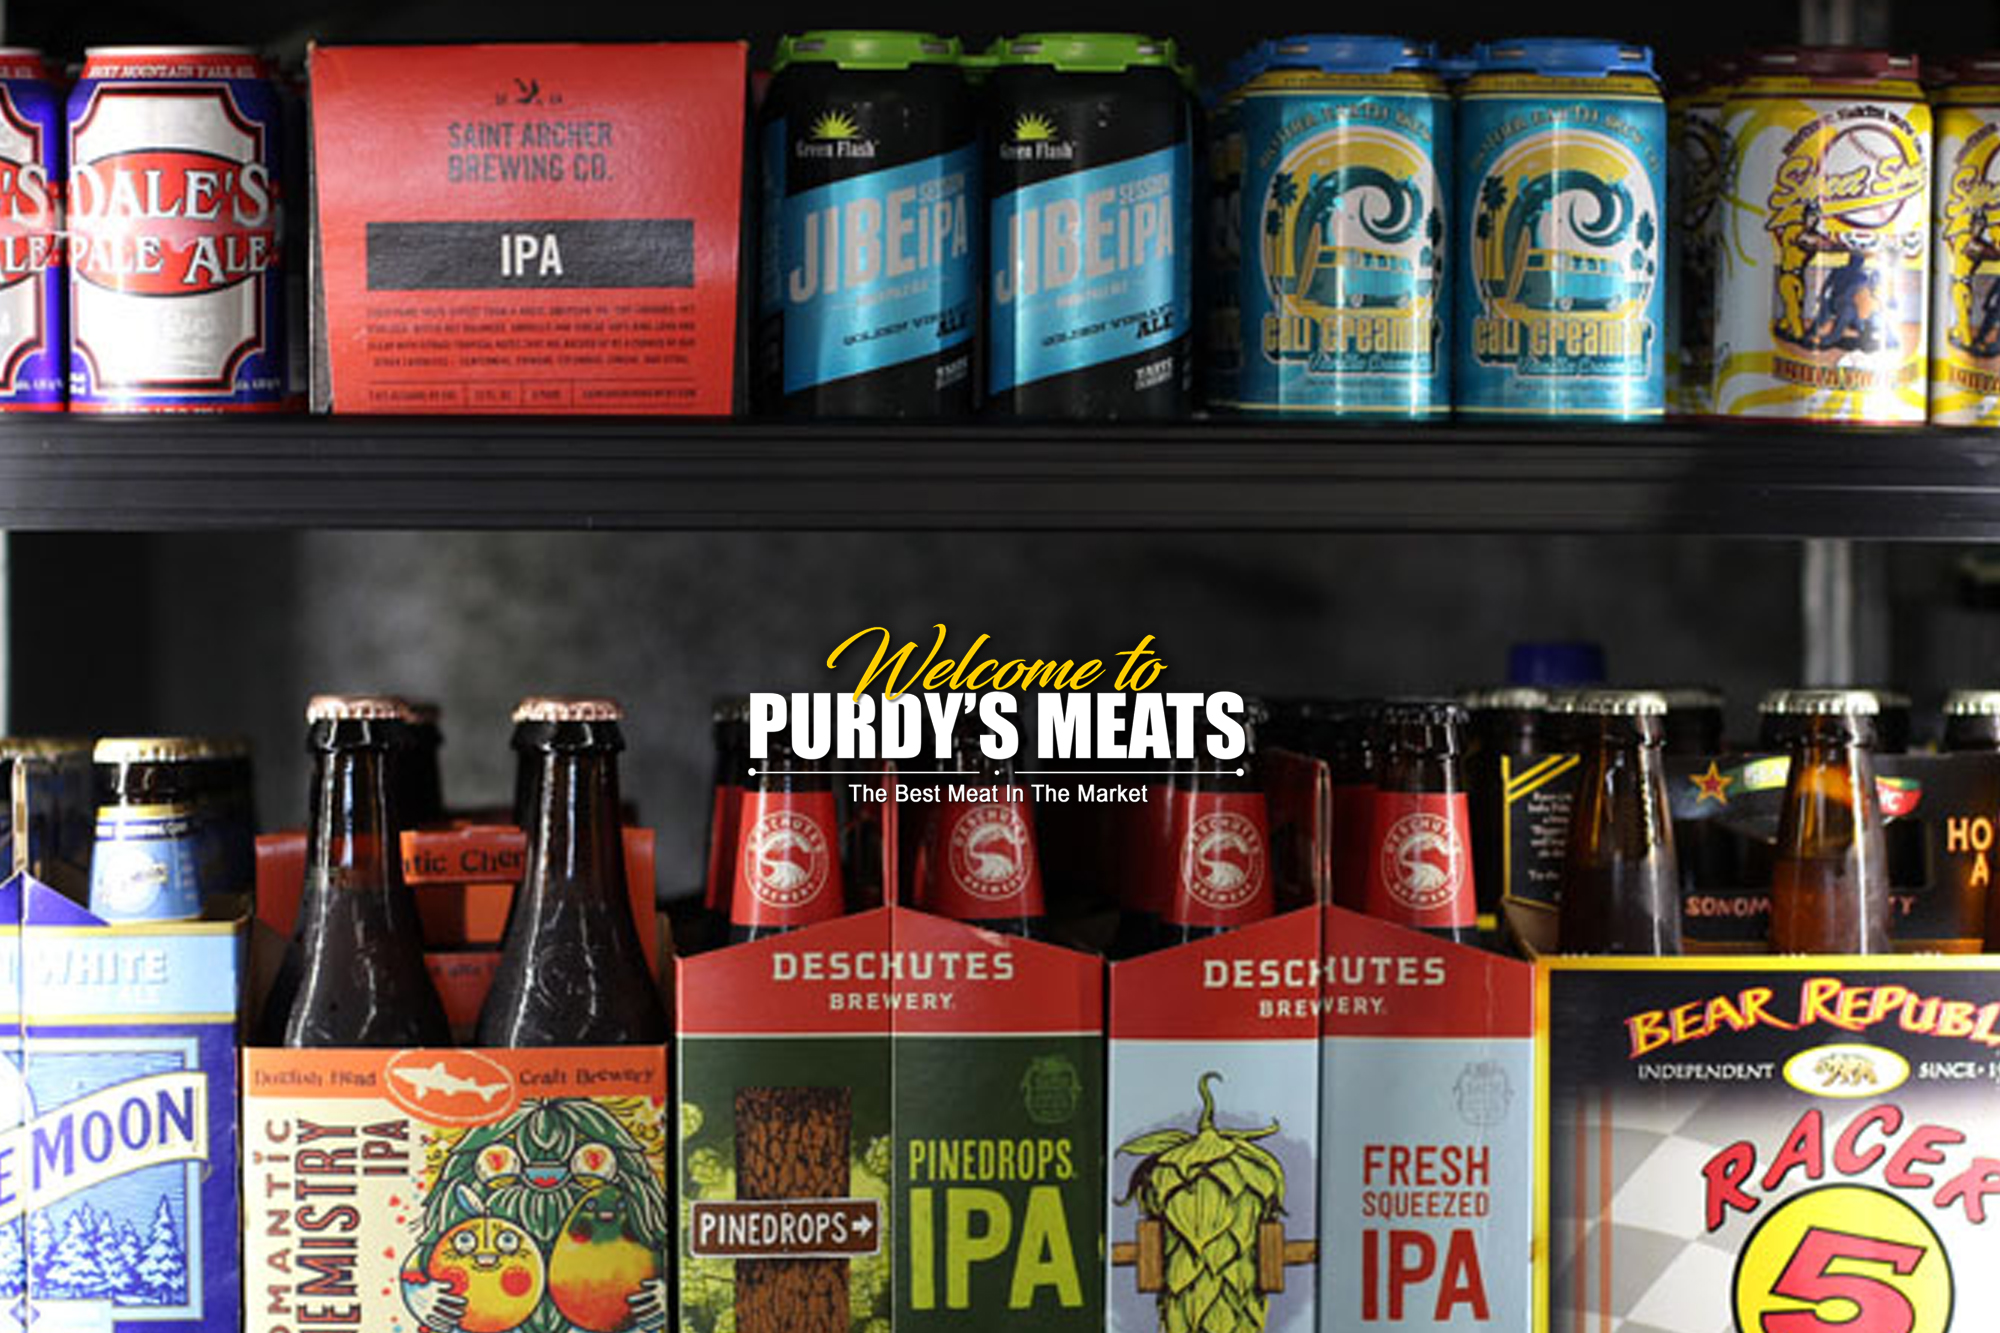 This banner image shows the Barstow Craft Beer Product of the Purdy's Quality Meats